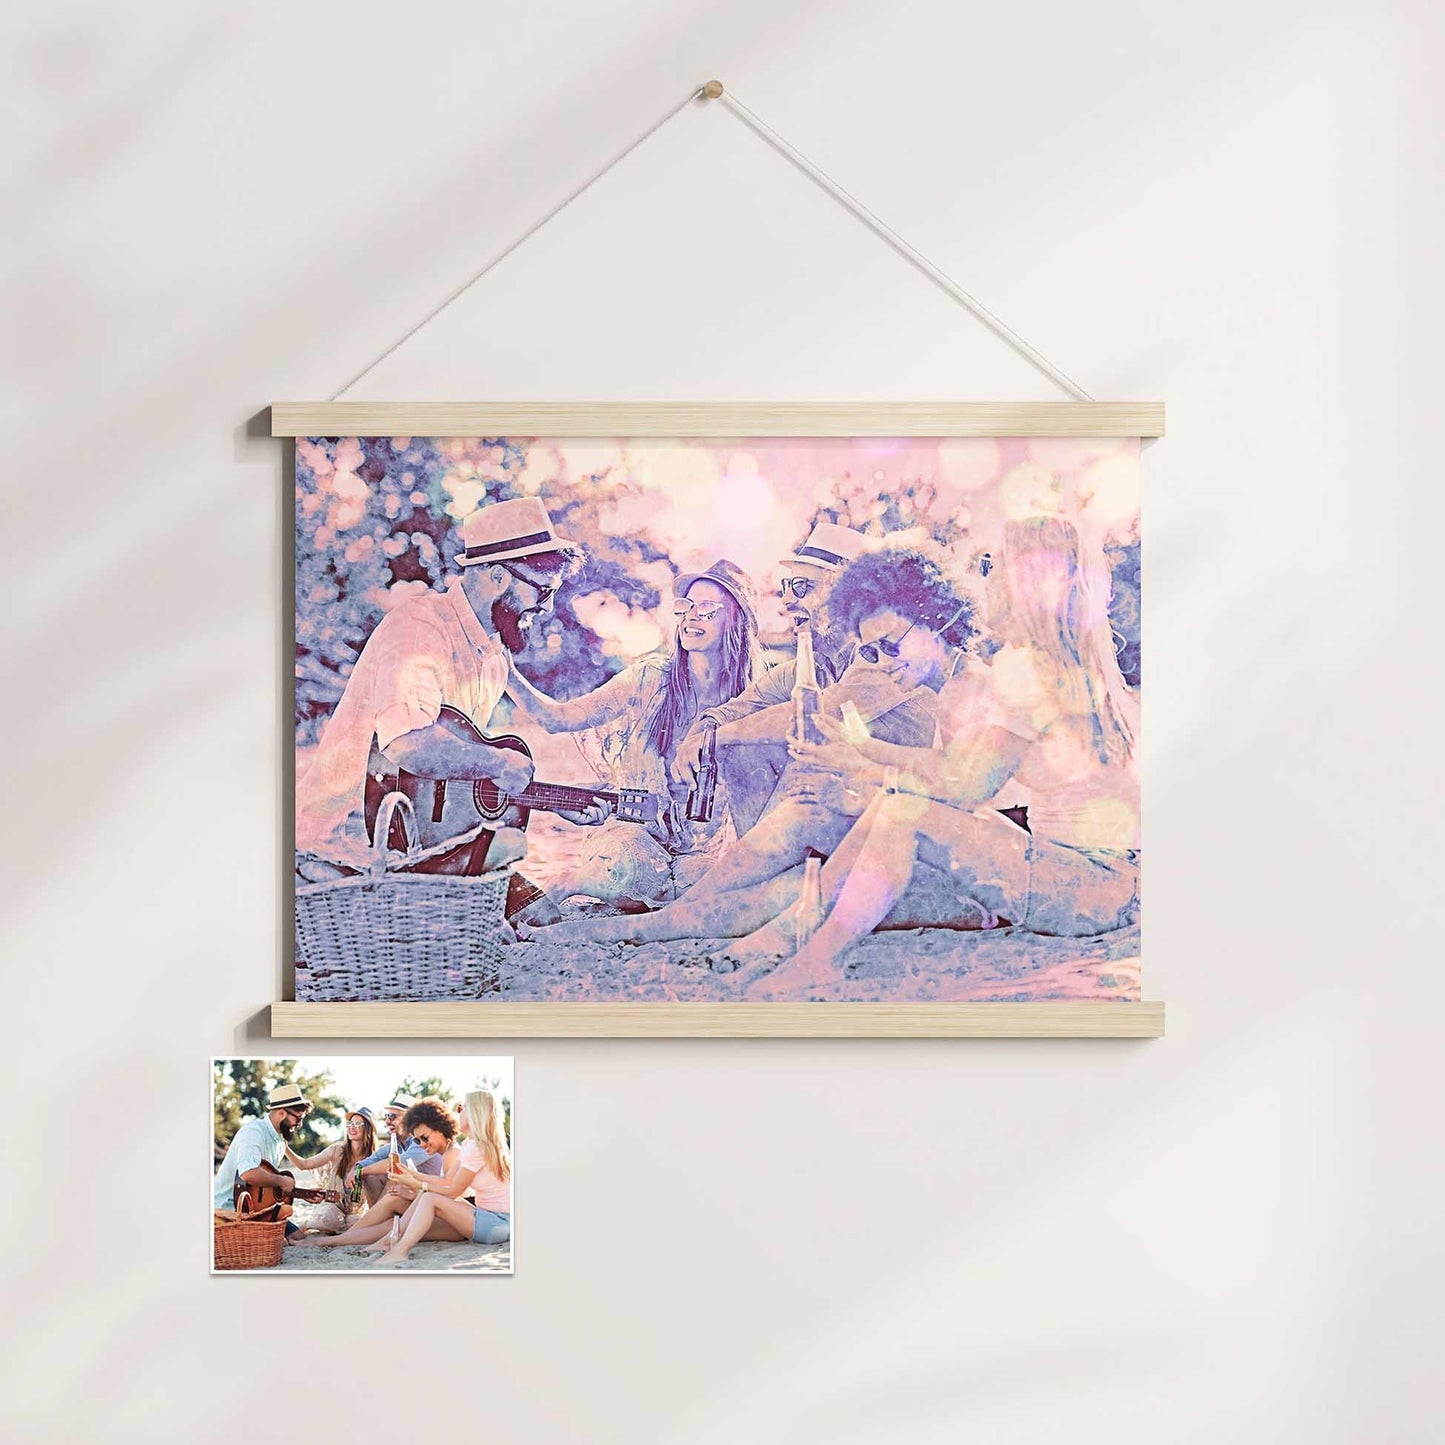 Infuse your space with a burst of creativity and positive energy with the Personalised Special Purple FX Poster Hanger. By transforming your photos into vibrant prints with a special effect filter in stunning purple hues